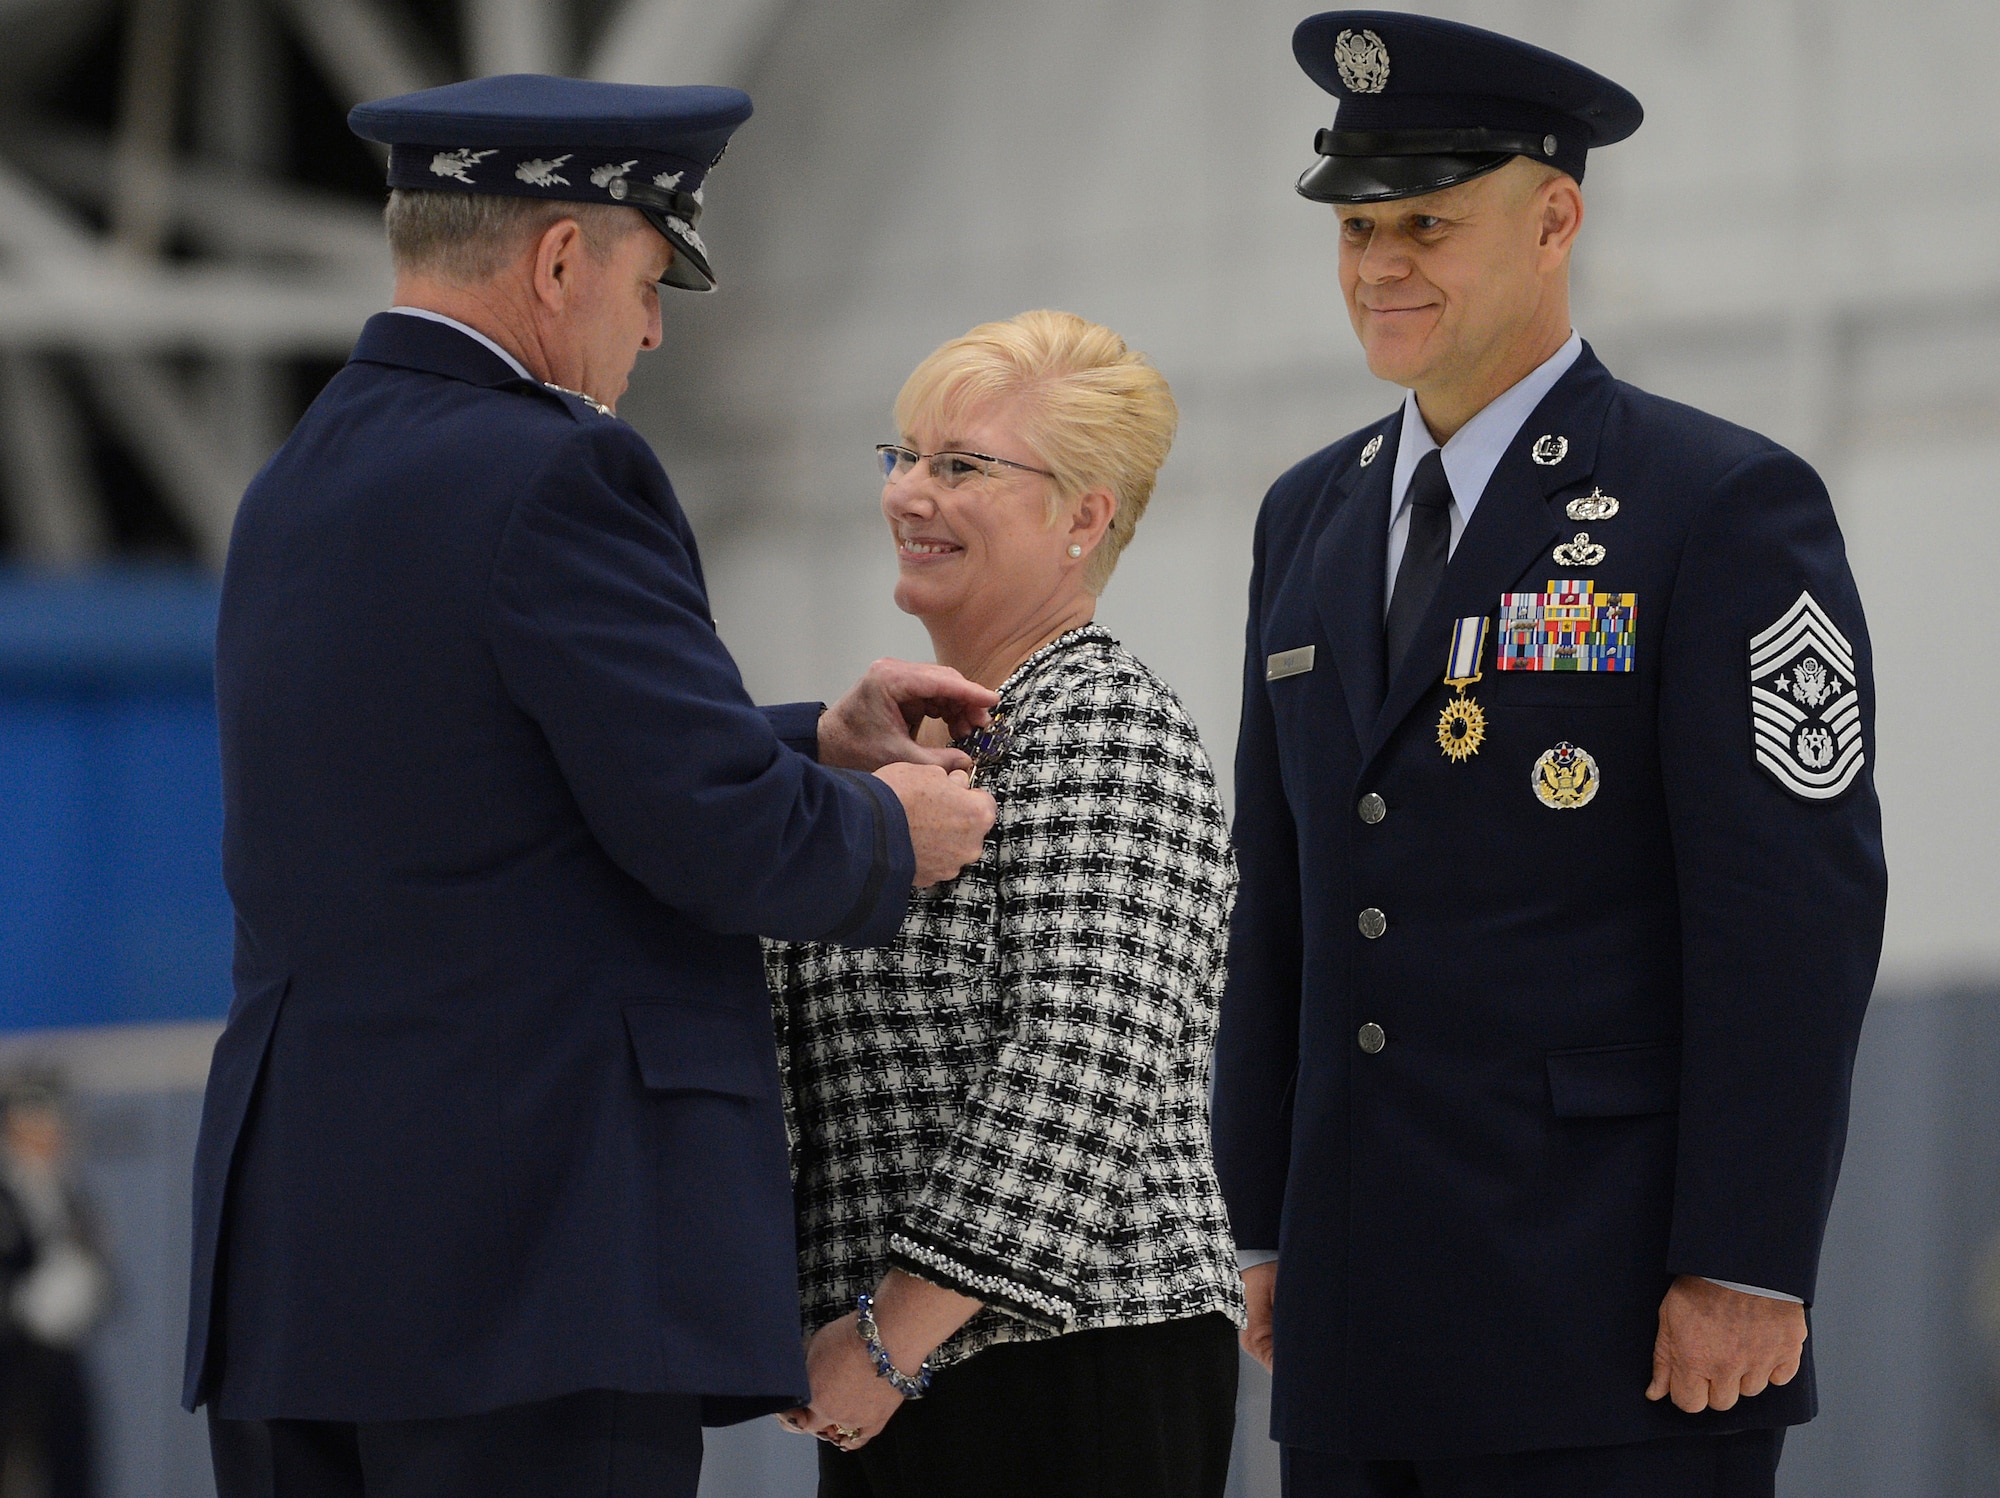 Air Force Chief of Staff Gen. Mark A. Welsh III presents "Miss Paula" Roy, the wife of Chief Master Sgt. of the Air Force James Roy, with the Distinguished Public Service Medal during Chief Roy's retirement ceremony on Joint Base Andrews, Md. on Jan. 24, 2013. Roy, the 16th Chief Master Sgt. of the Air Force, is retiring after more than 30 years of service. (U.S. Air Force photo/Jim Varhegyi)